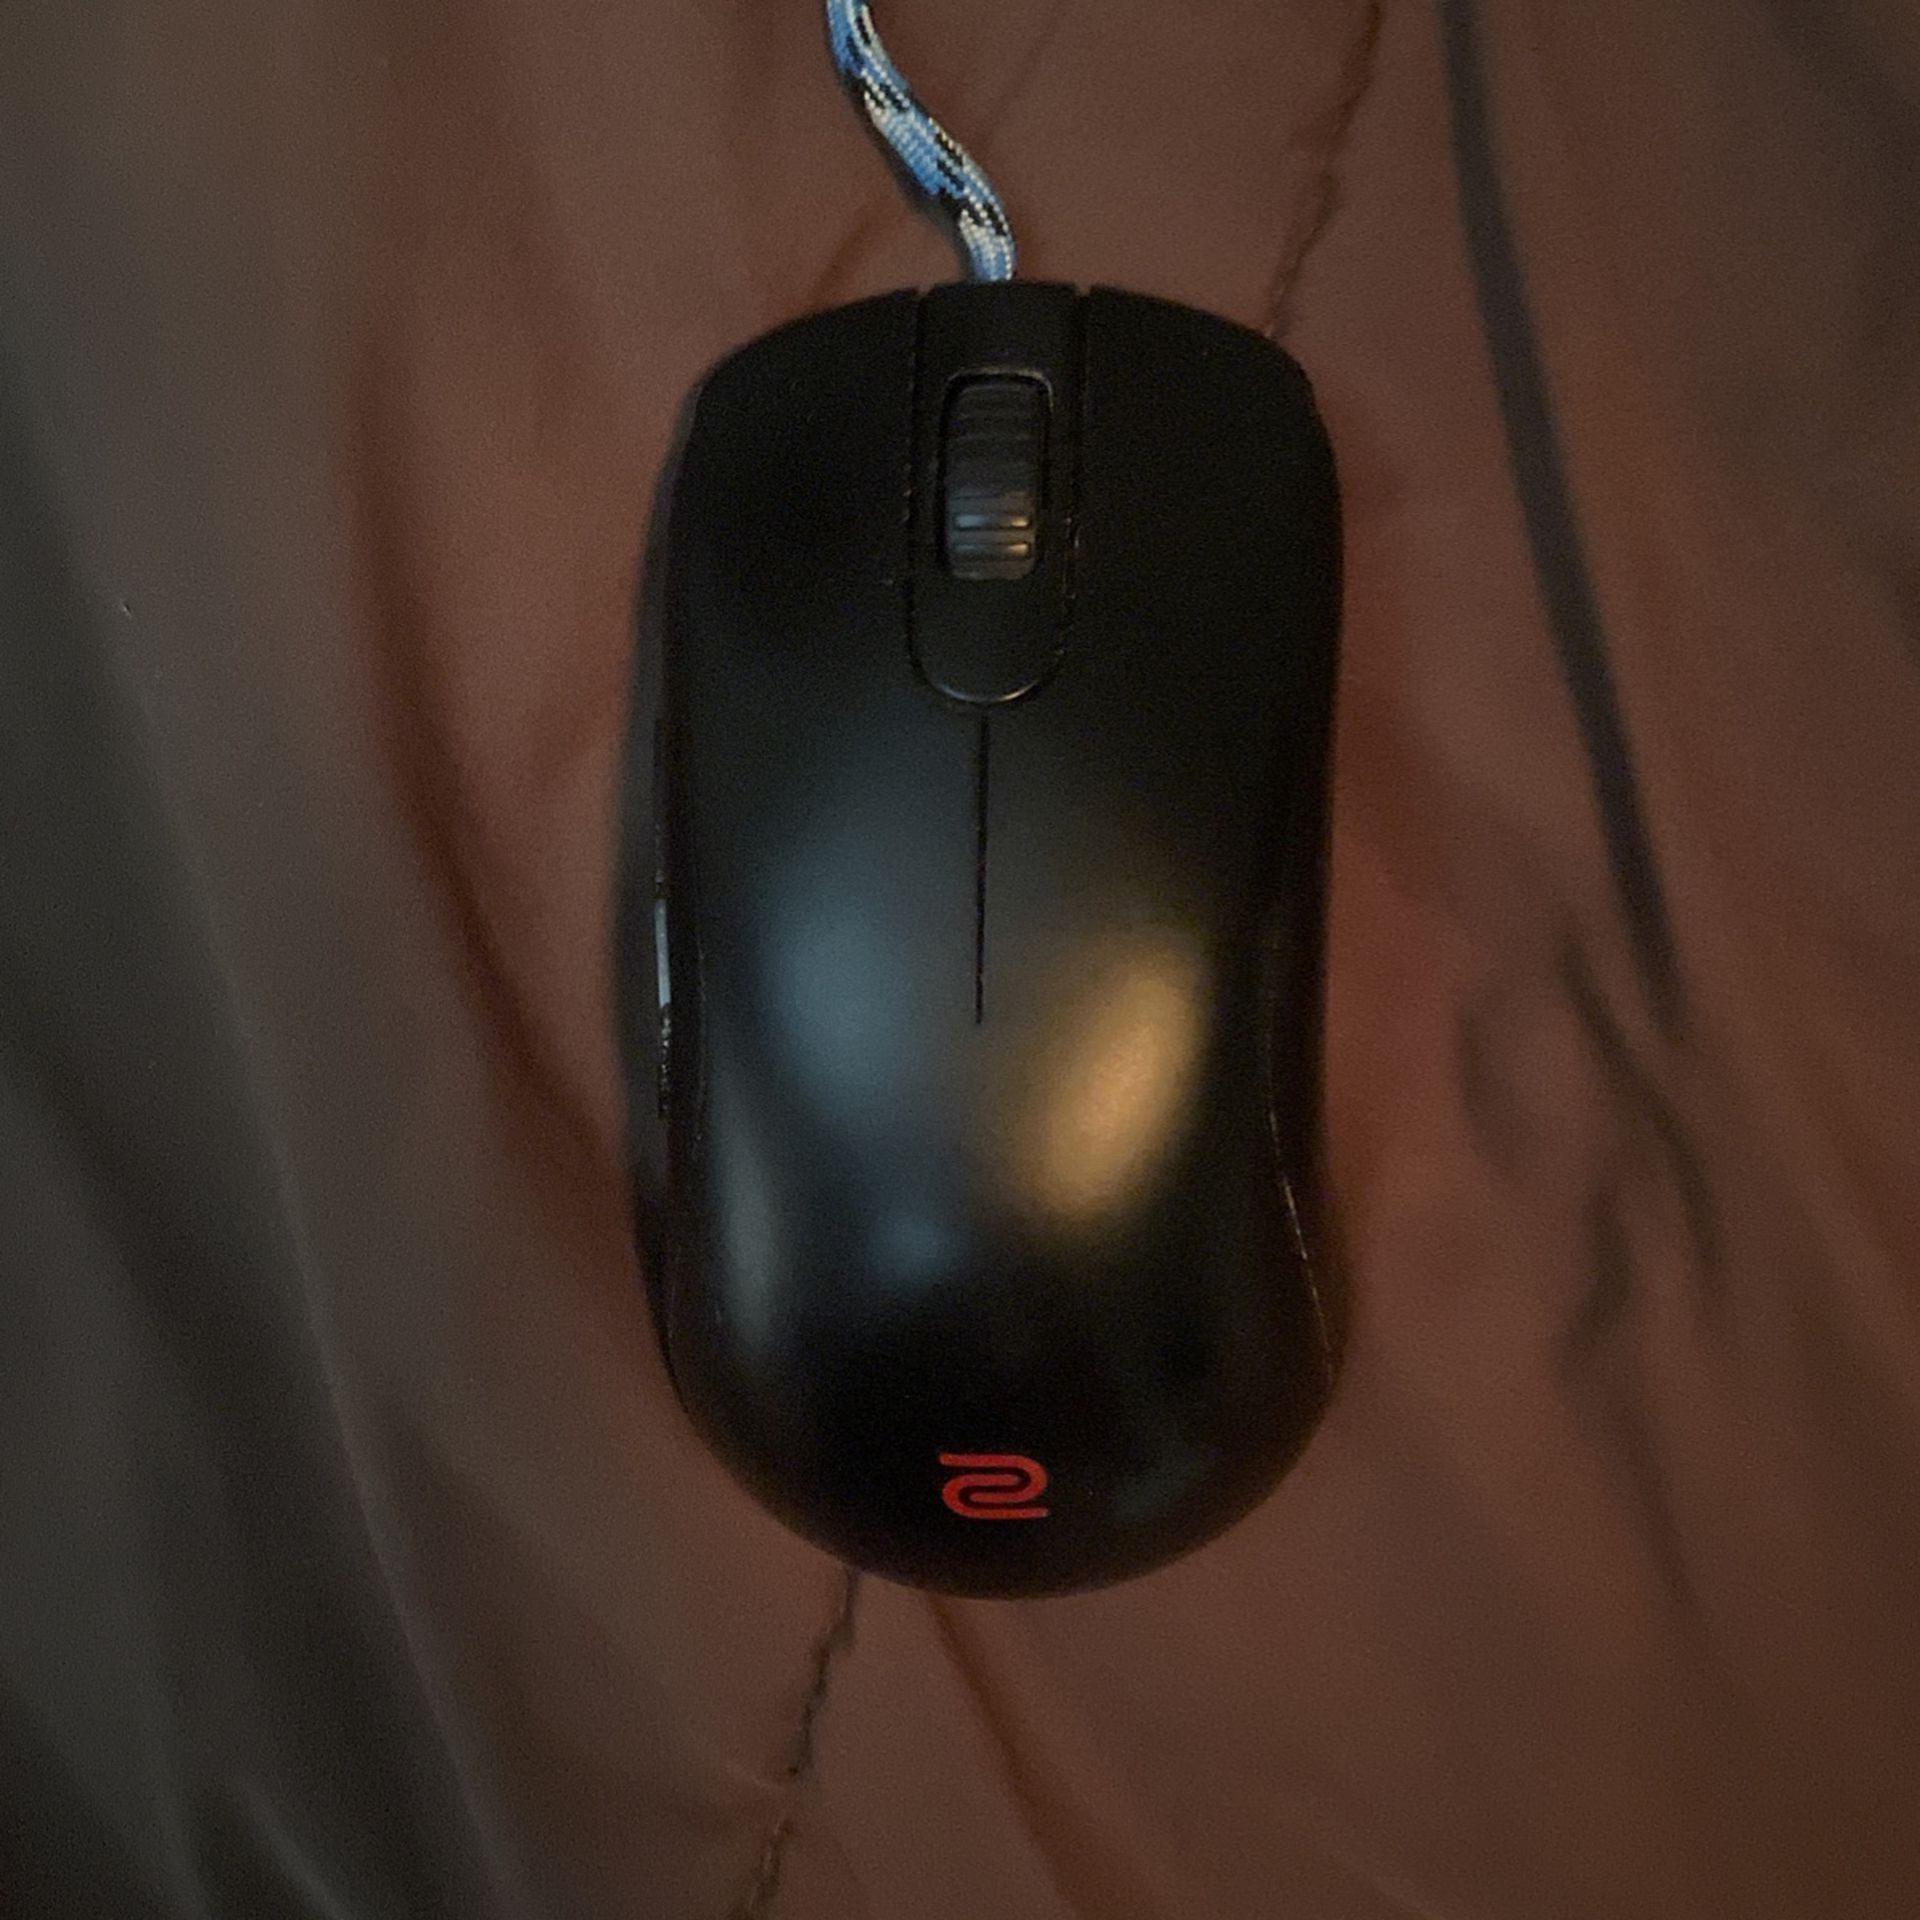 Zowie S2 Gaming Mouse with Paracord